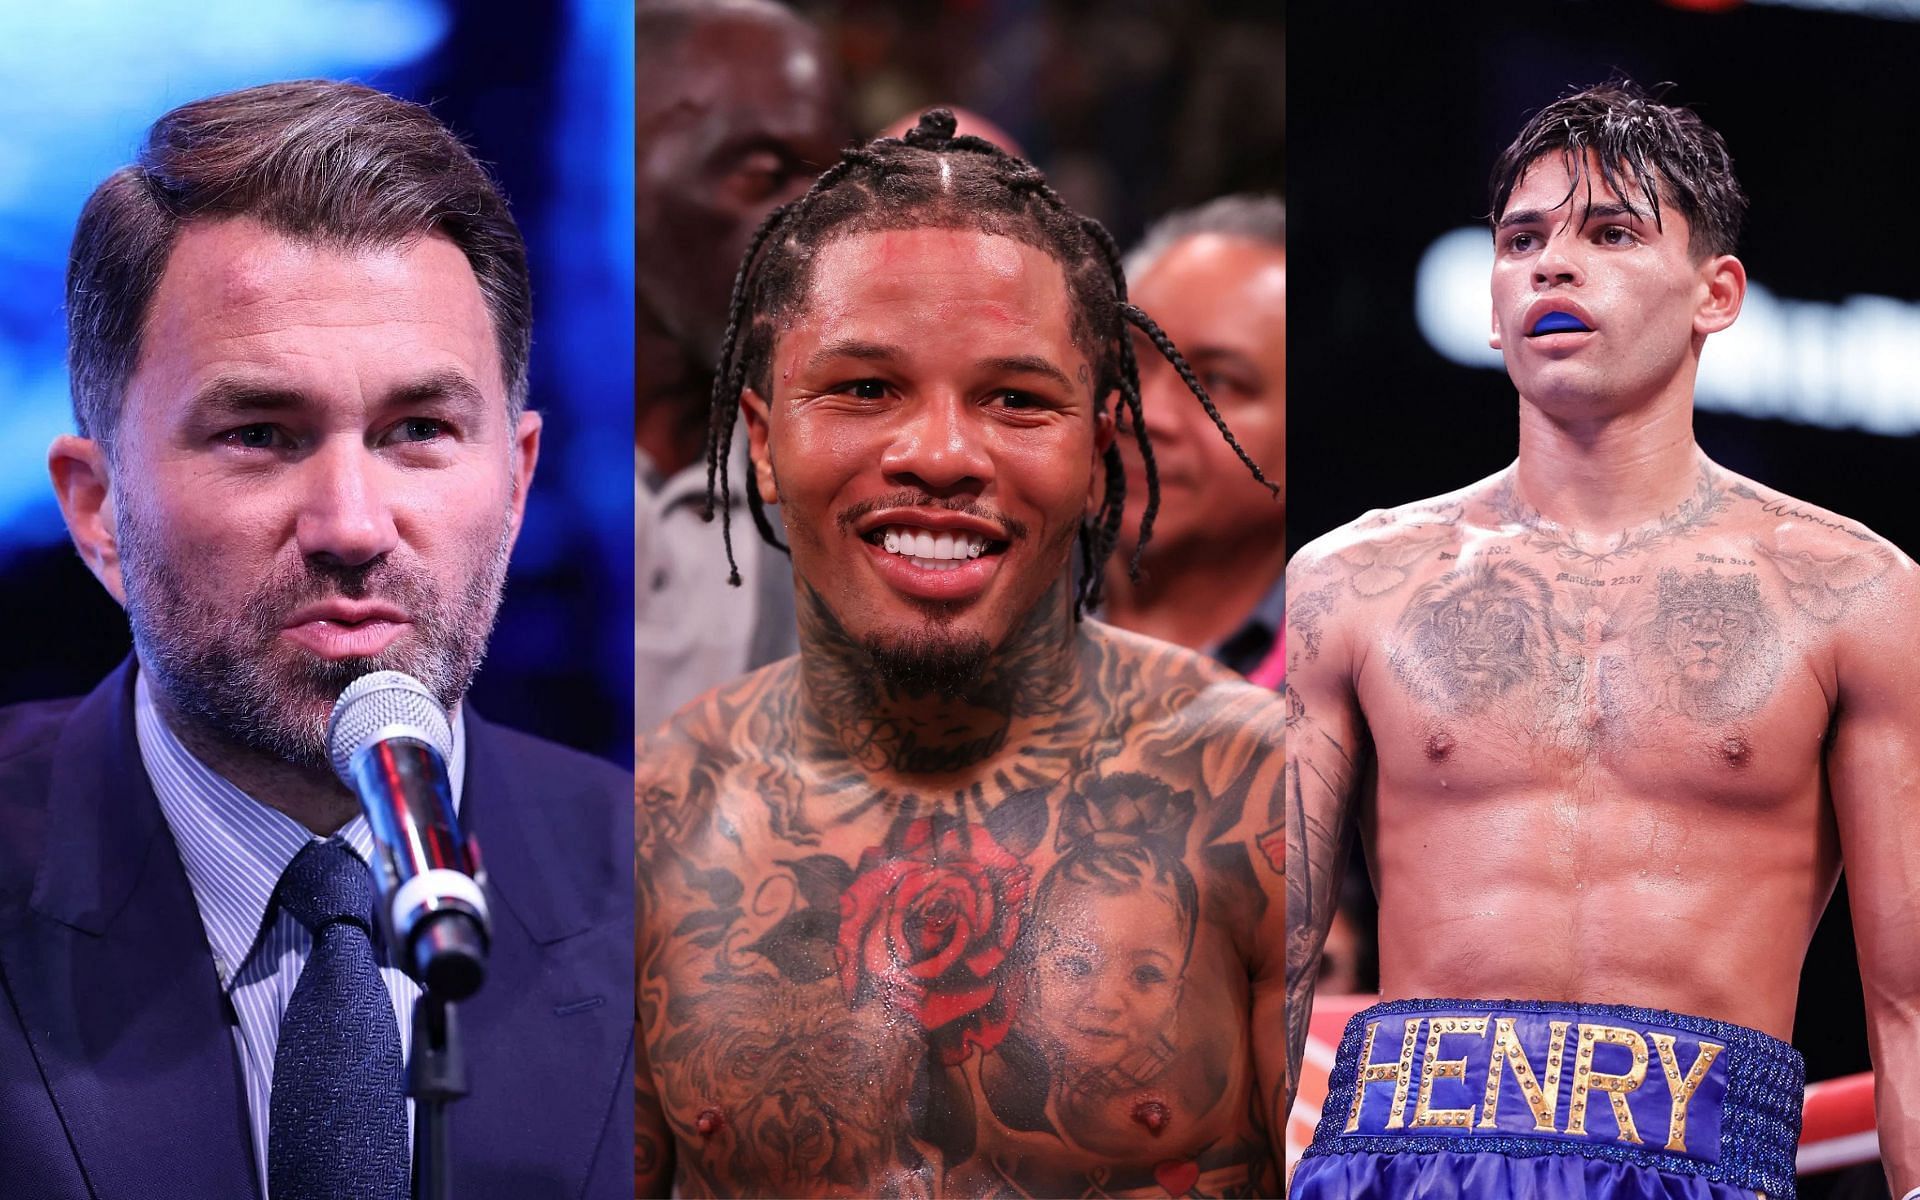 Eddie Hearn (left) takes aim at Gervonta Davis (middle) for his comments about Hearn